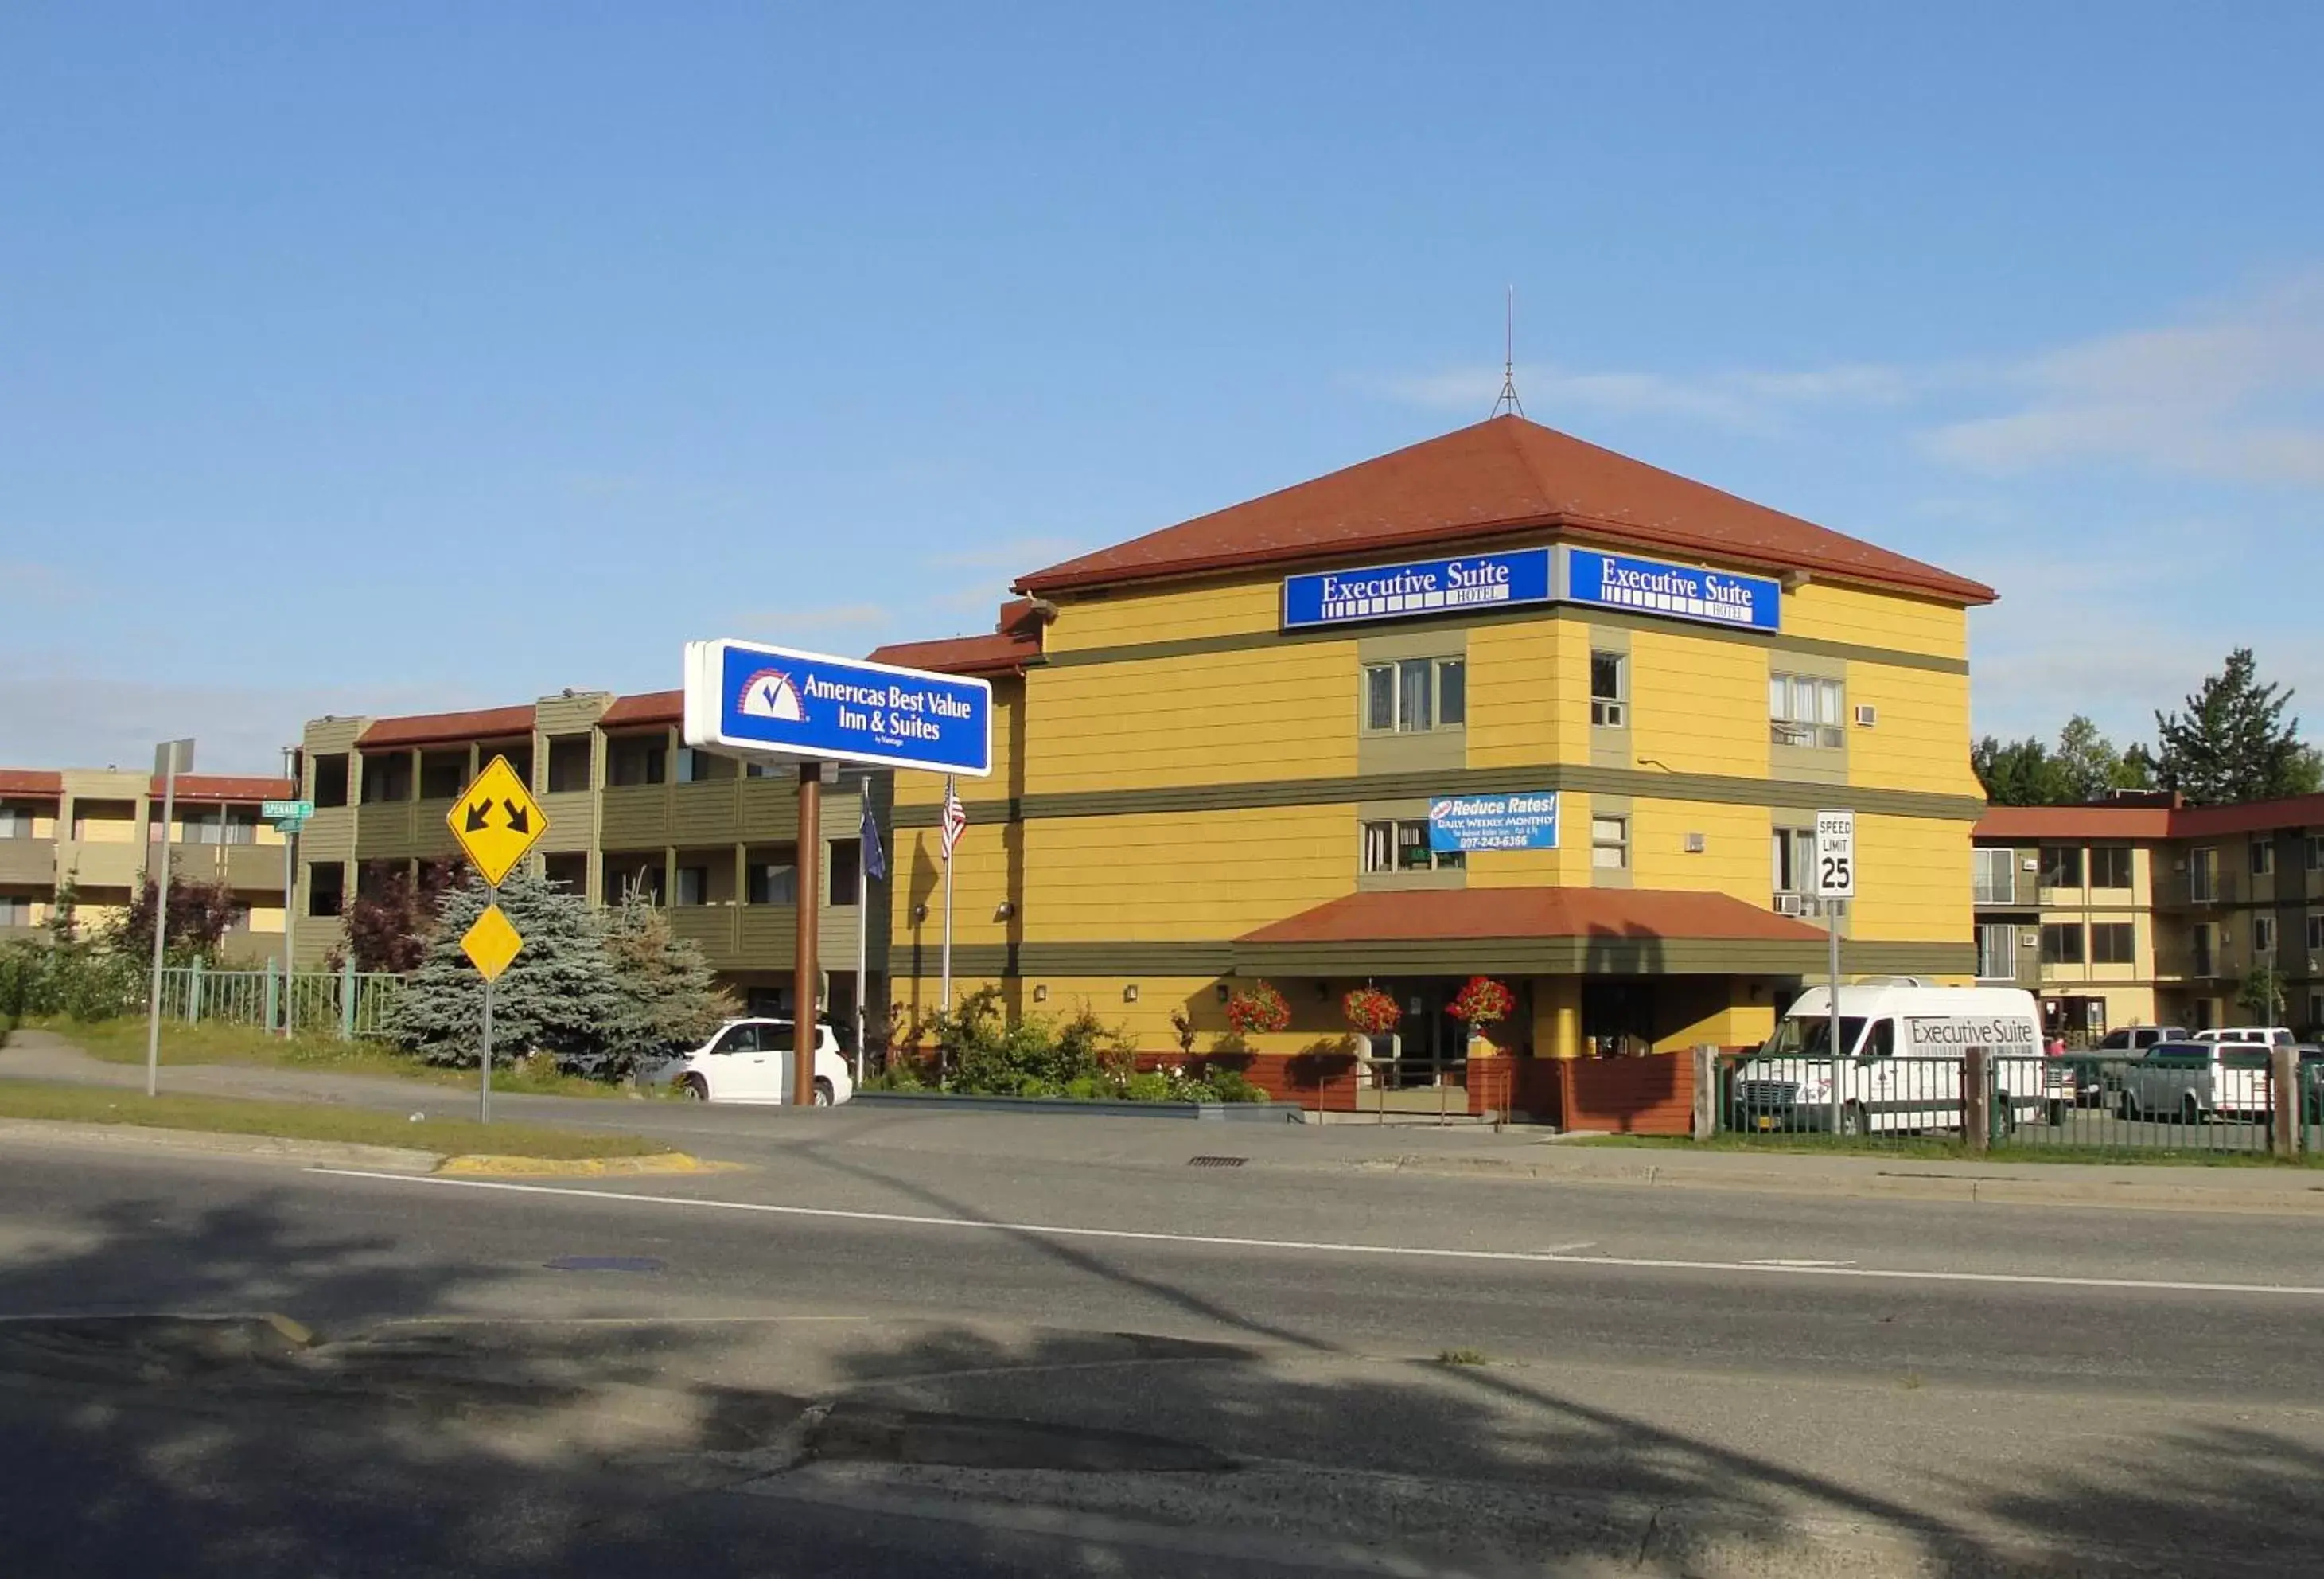 Facade/entrance, Property Building in Americas Best Value Inn & Suites Anchorage Airport